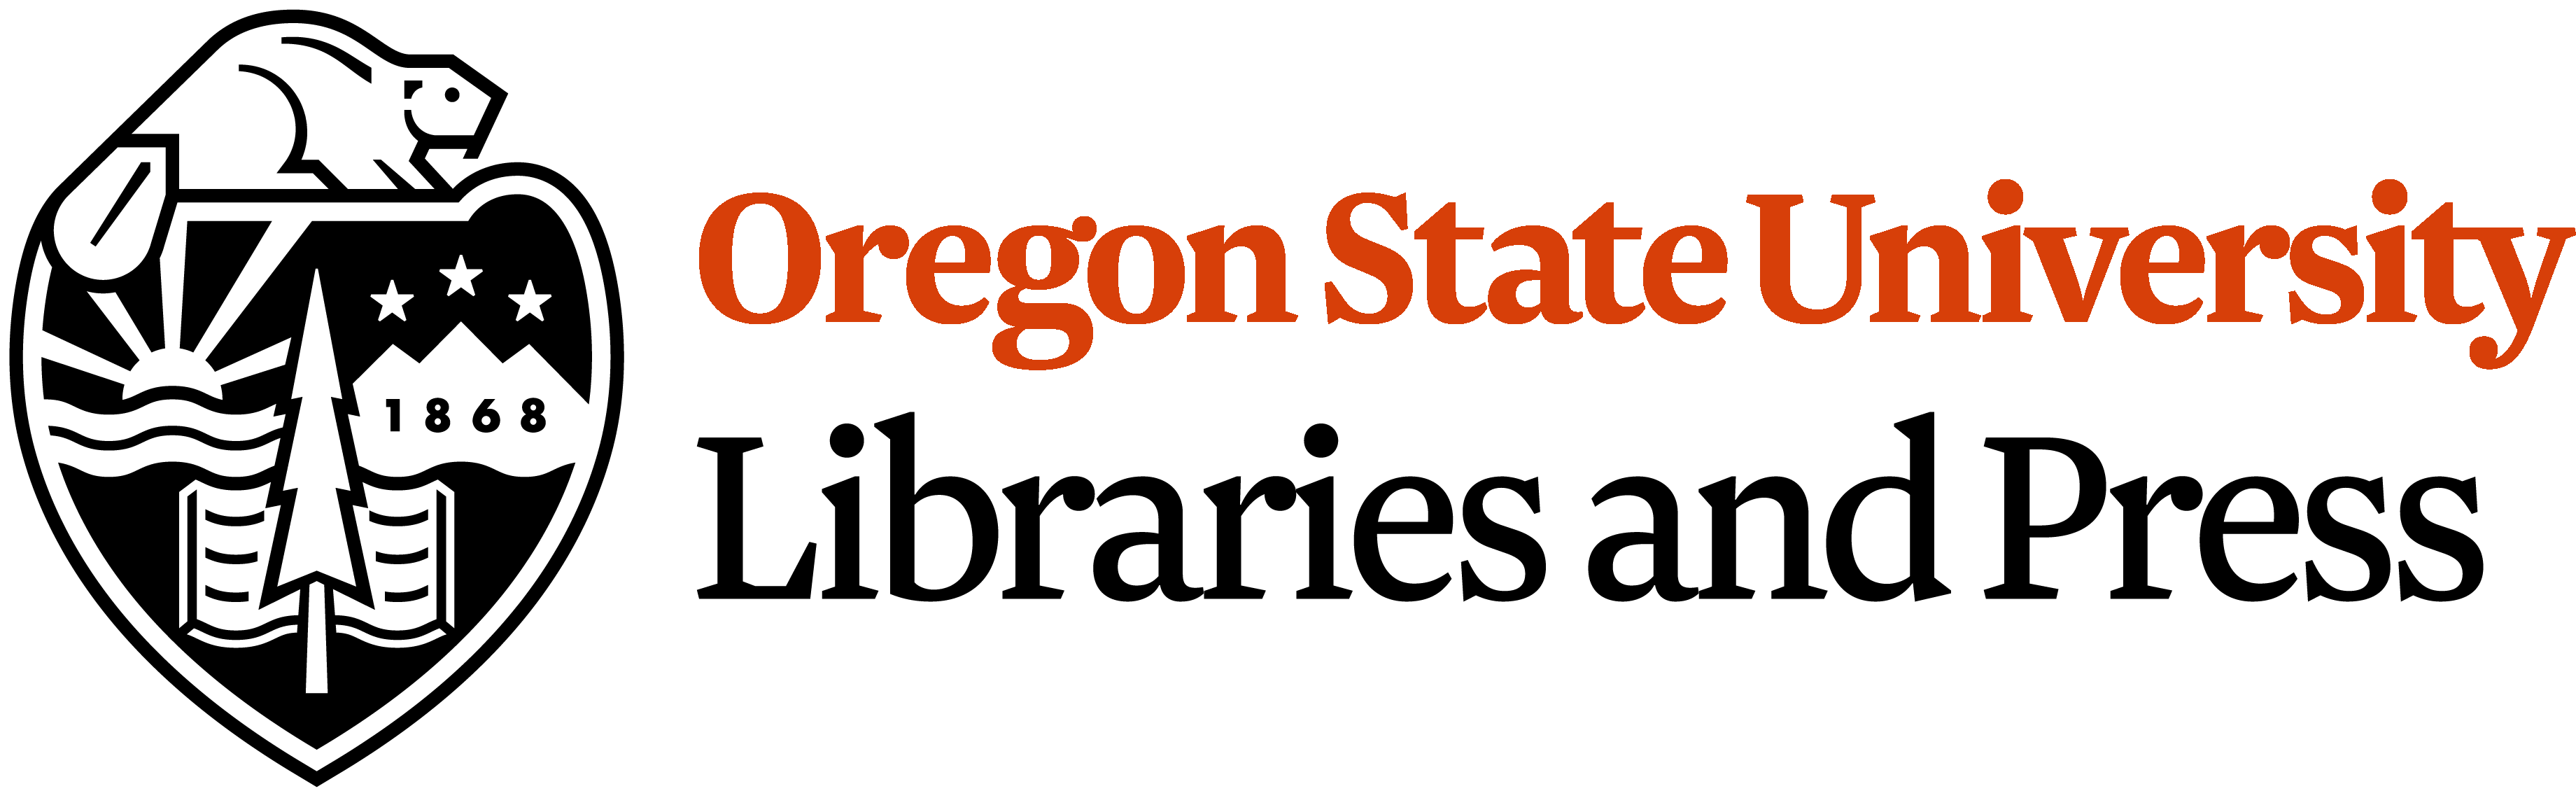 Oregon State University Libraries and Press